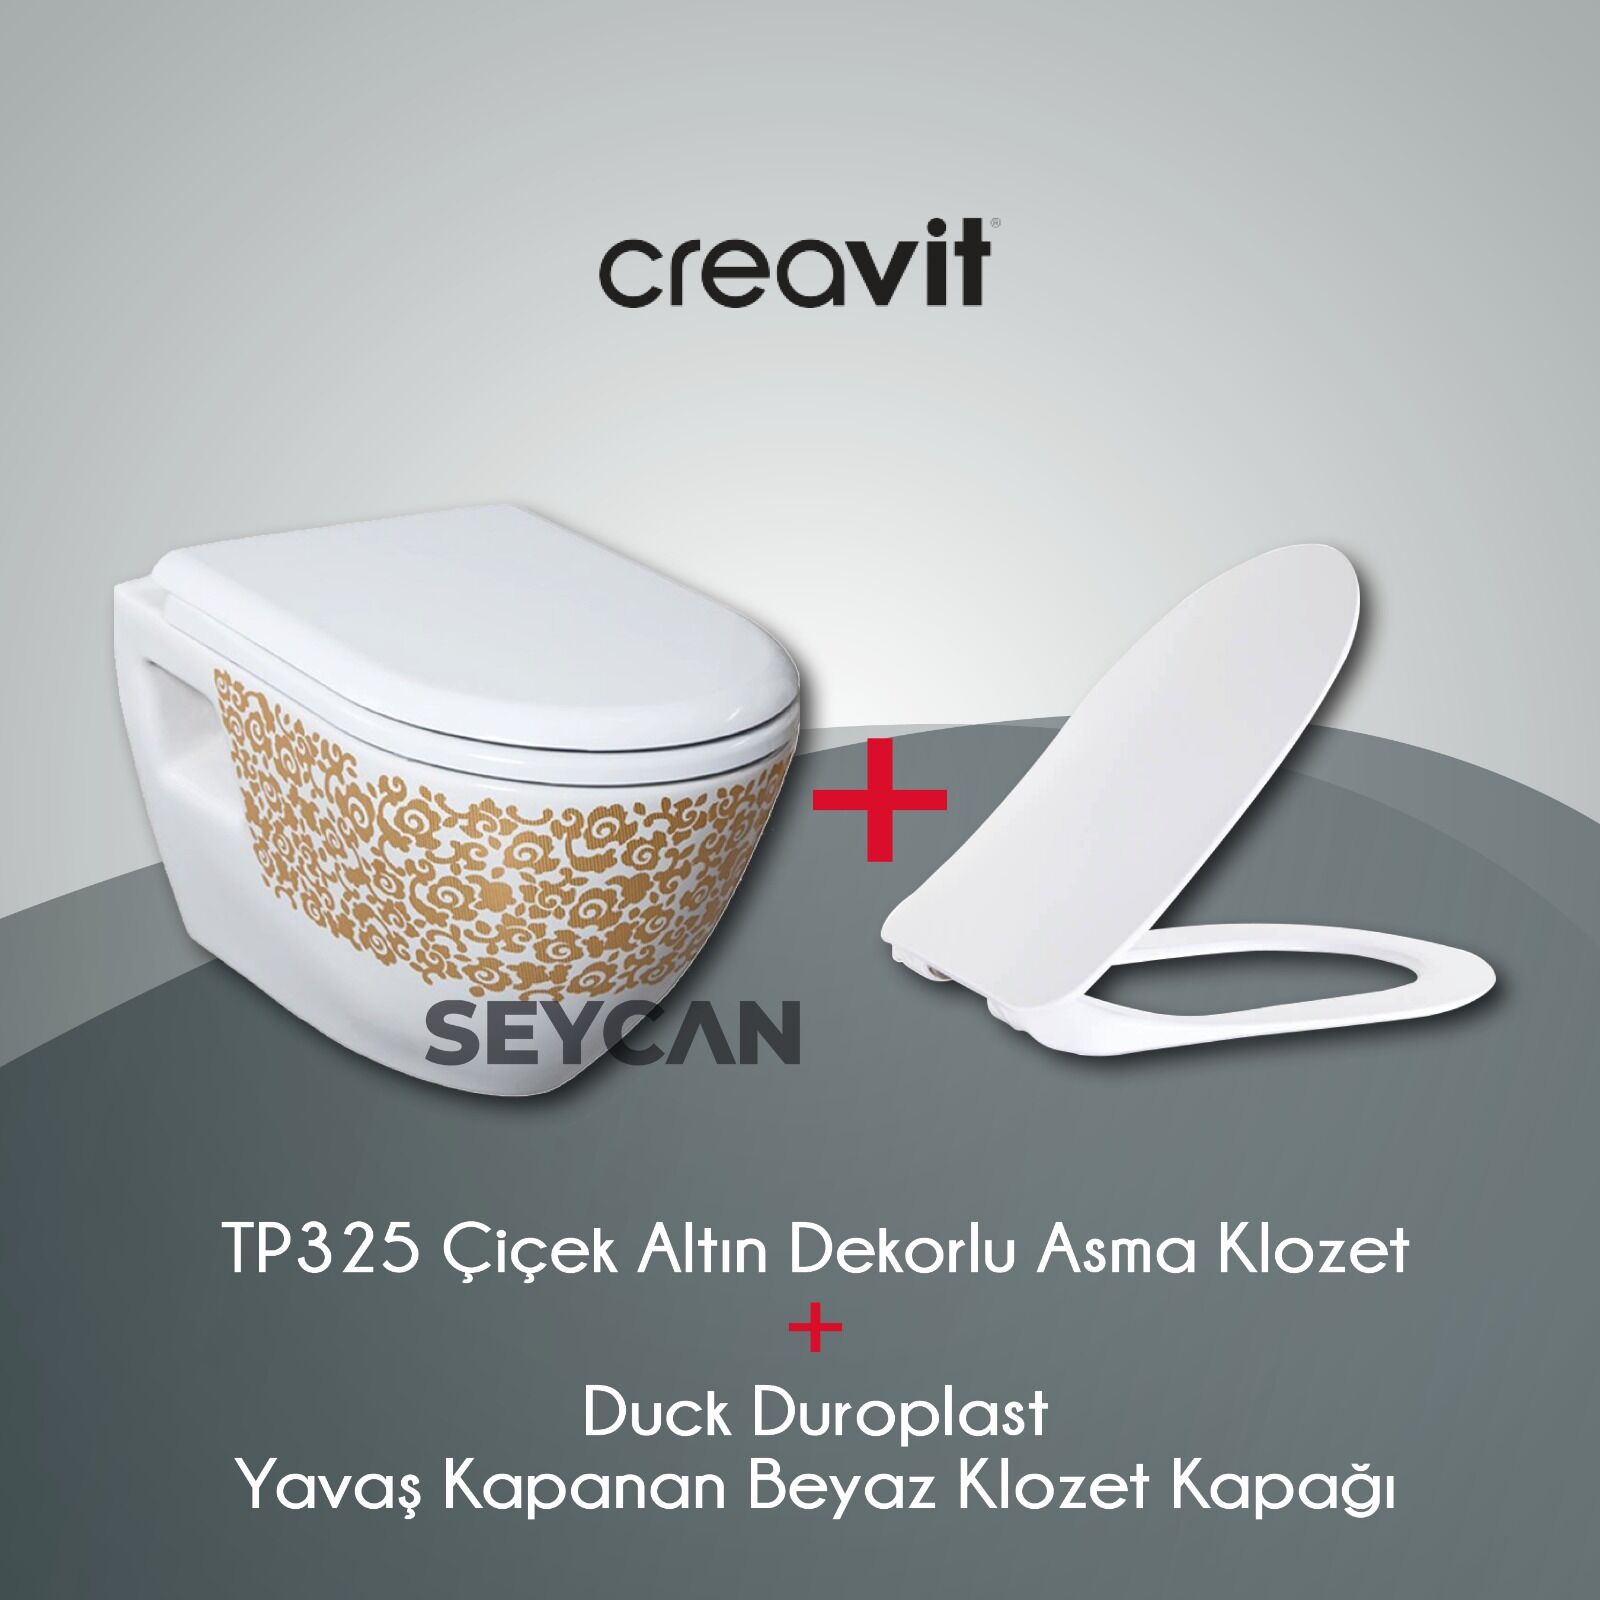 Creavit TP325 Floral Gold Hanging Toilet Seat + Duck Duroplast Soft Seat Cover